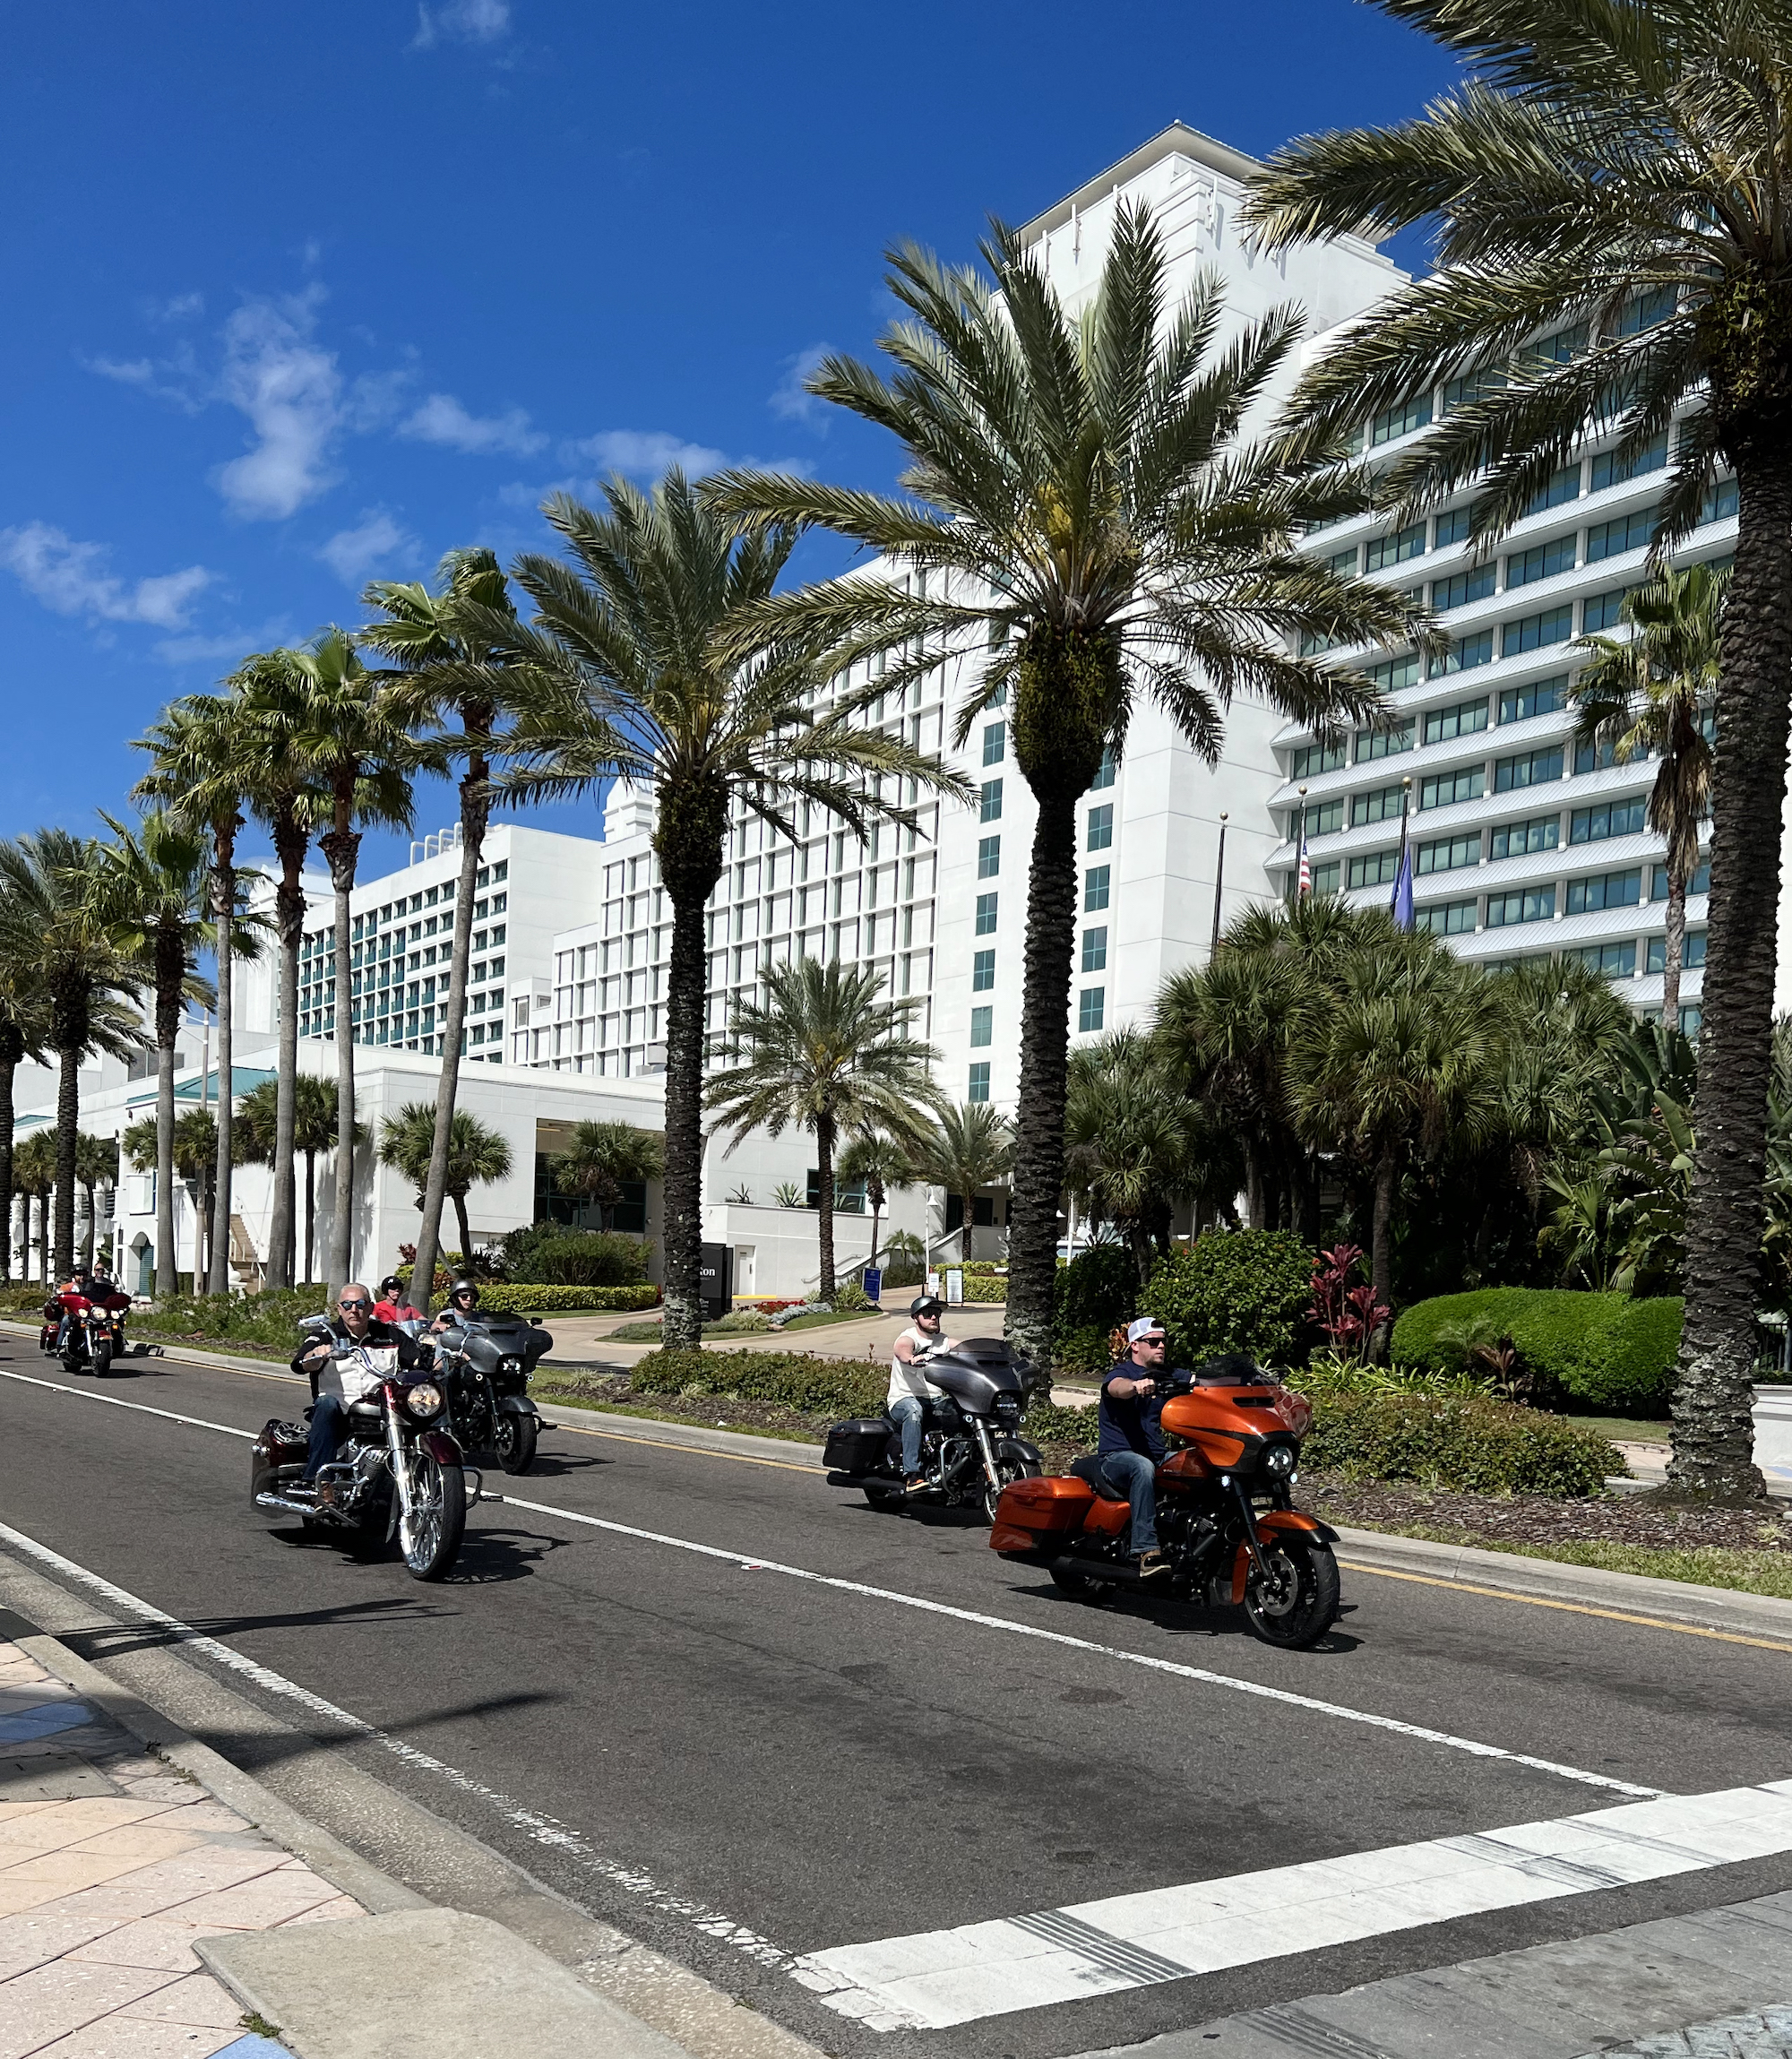 A view of 2021's Daytona Biketoberfest. Media sourced from the Daytona Beach Area Convention and Visitors Bureau on the official press release.